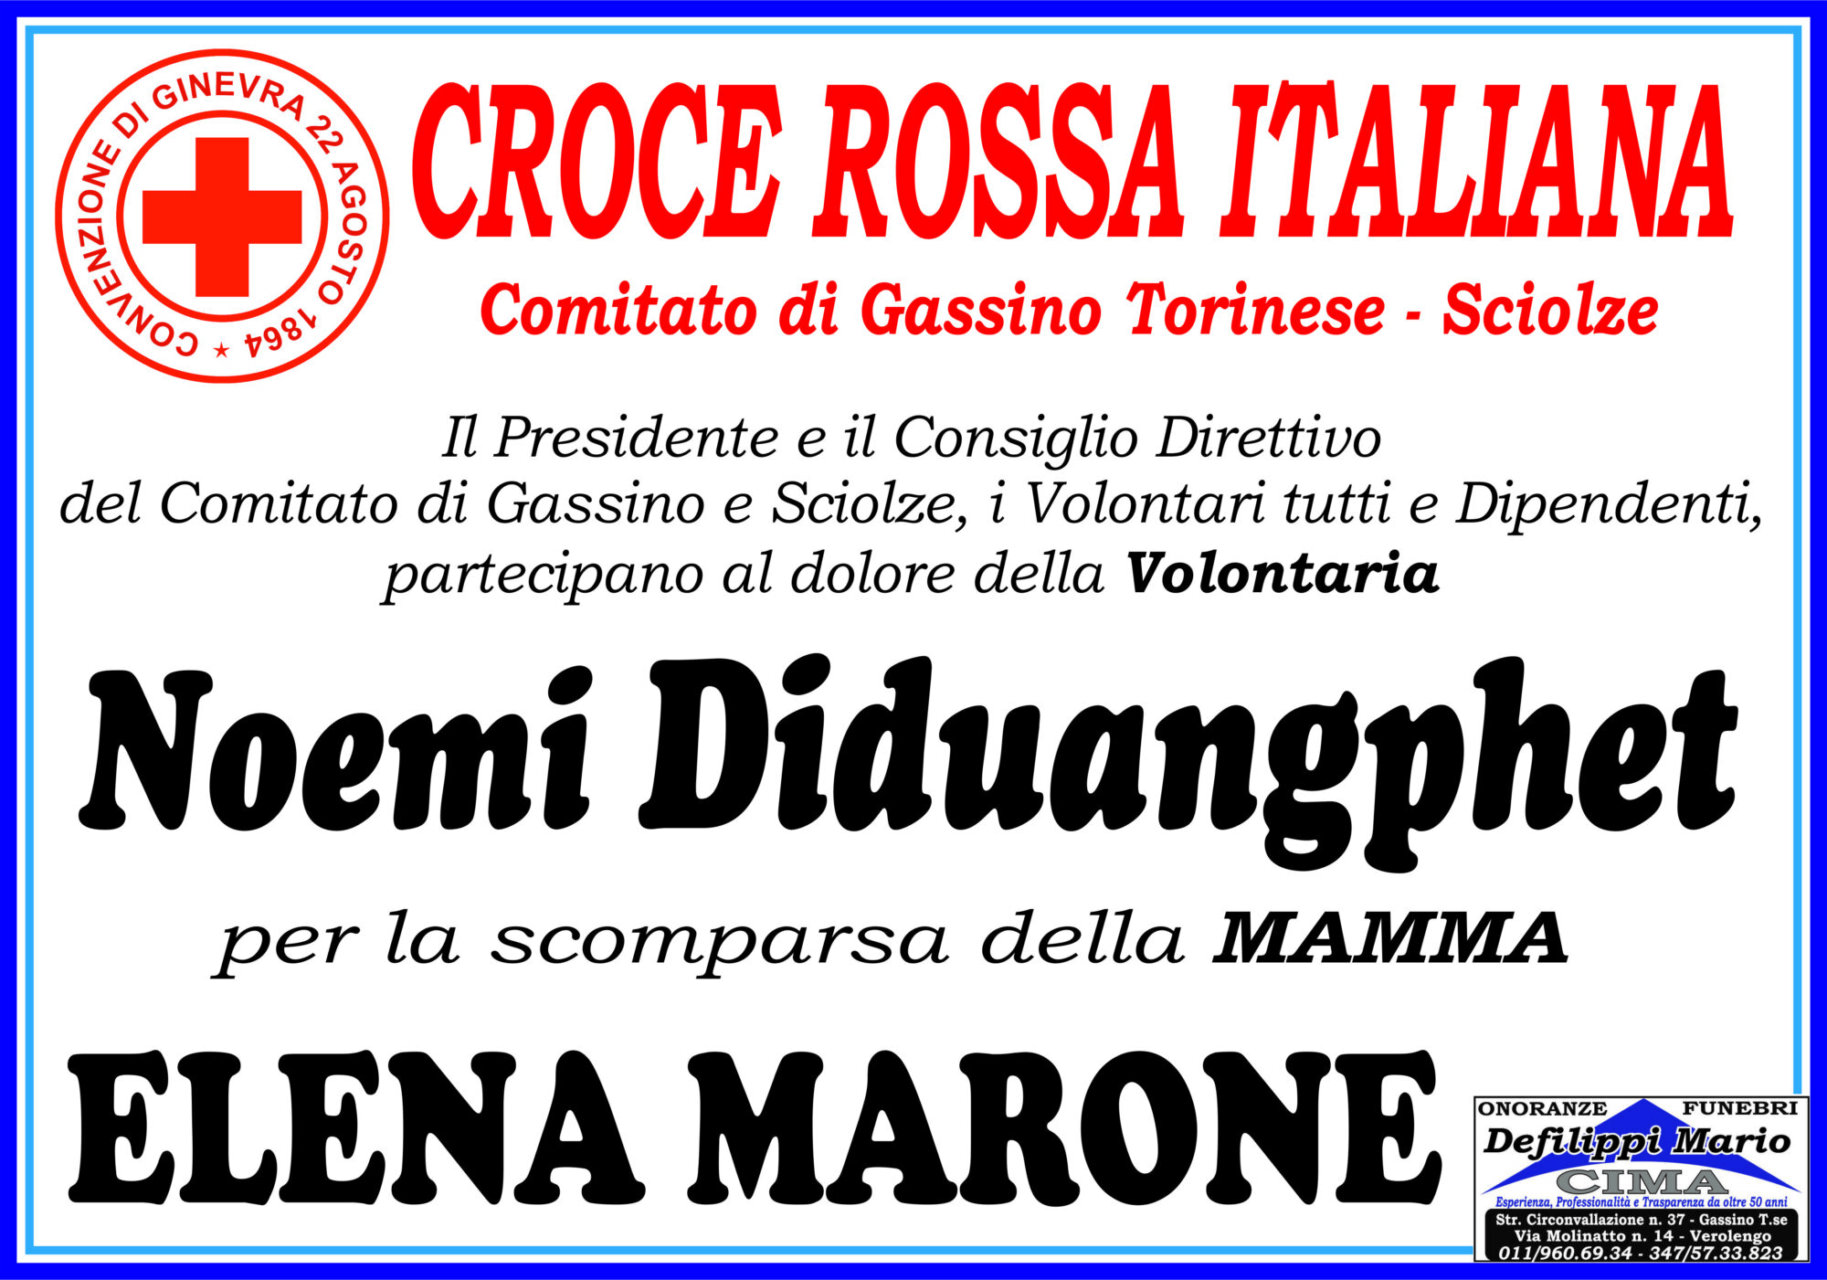 Croce-Rossa-scaled